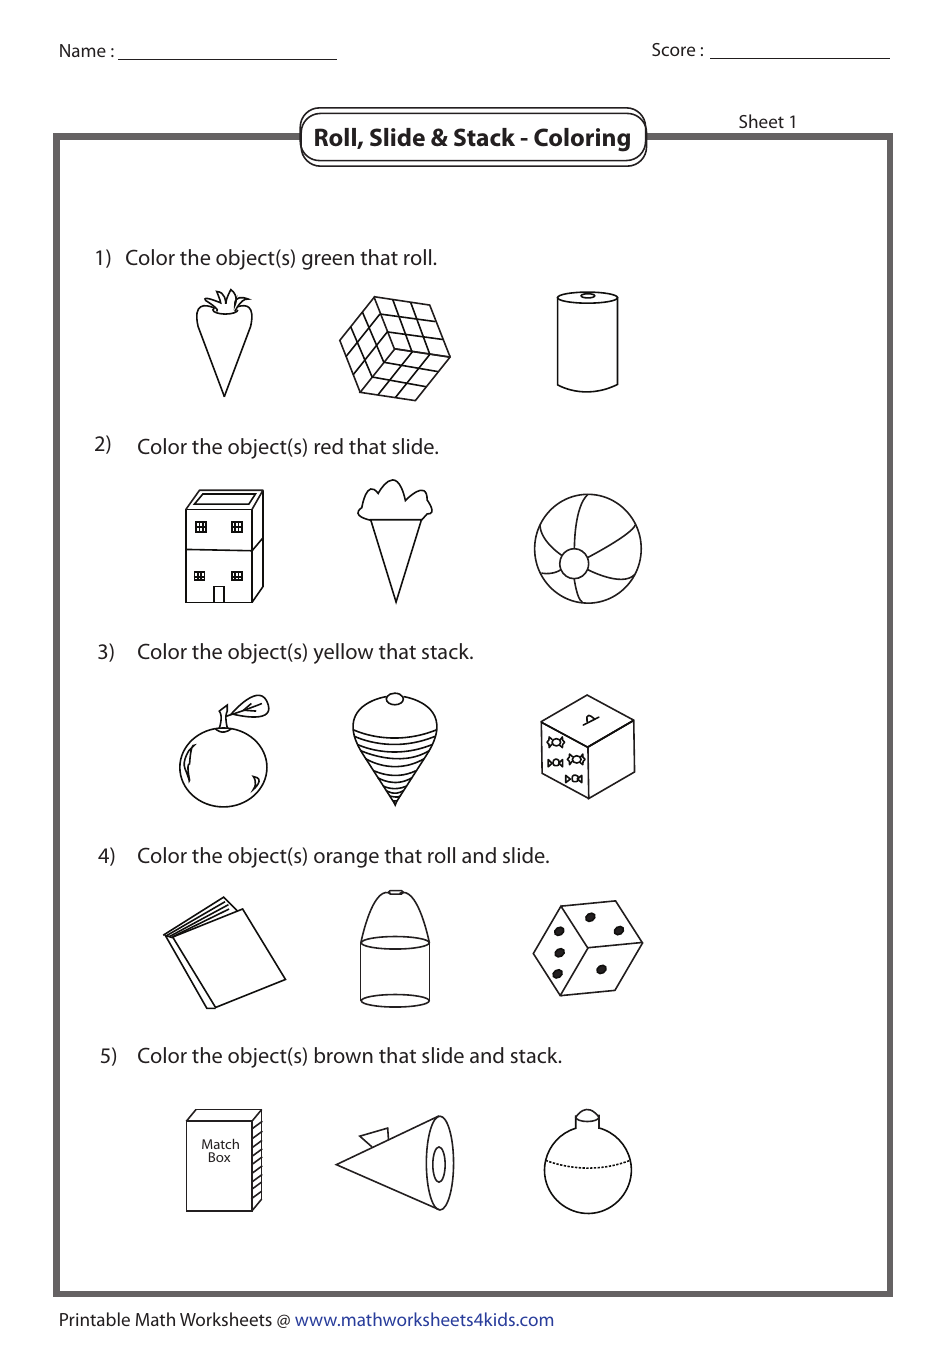 roll slide stack coloring worksheet with answers download printable pdf templateroller